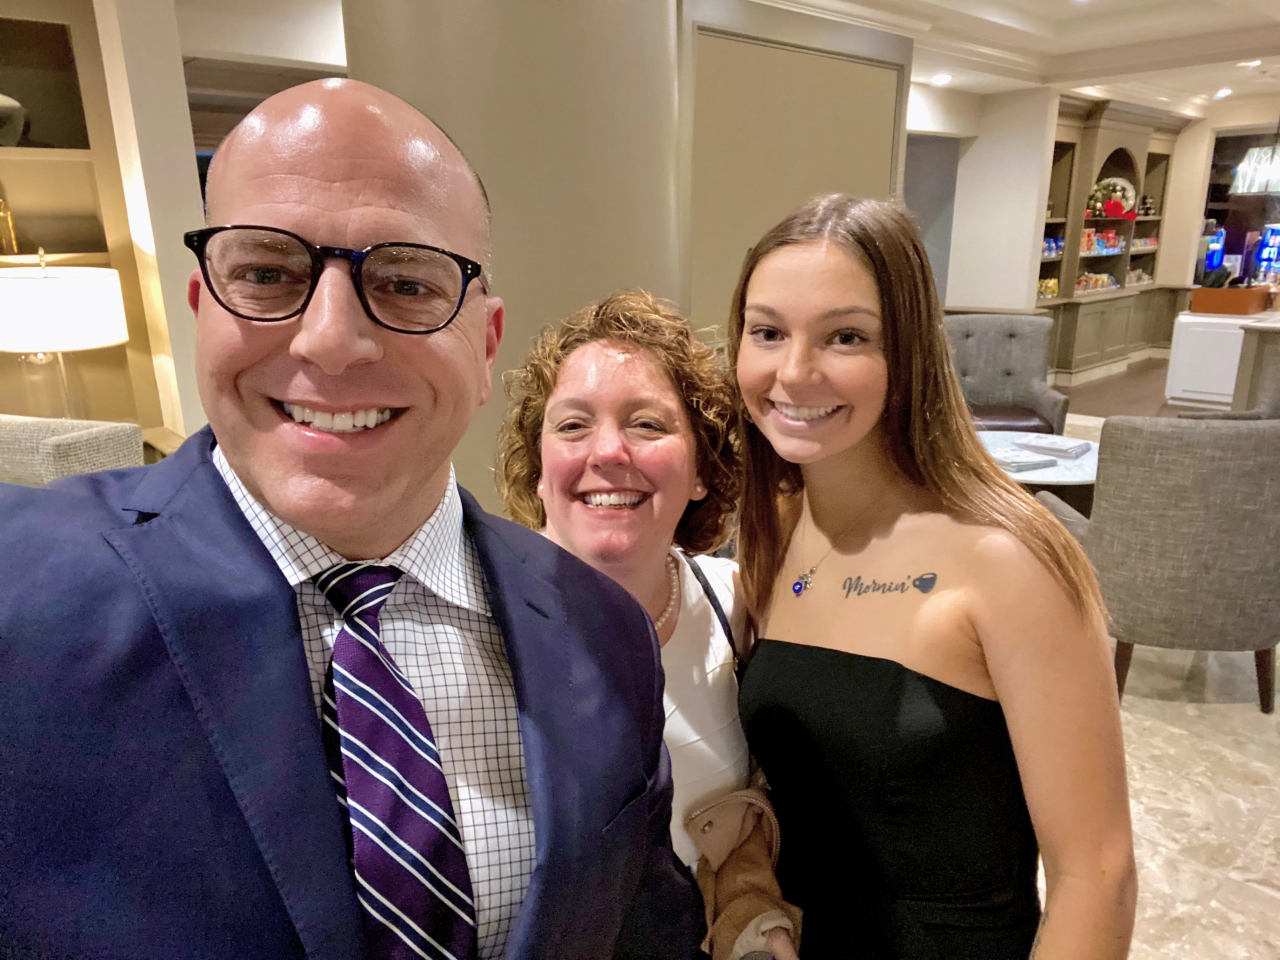 Scott, his wife and daughter taking a 'selfie' in a lobby